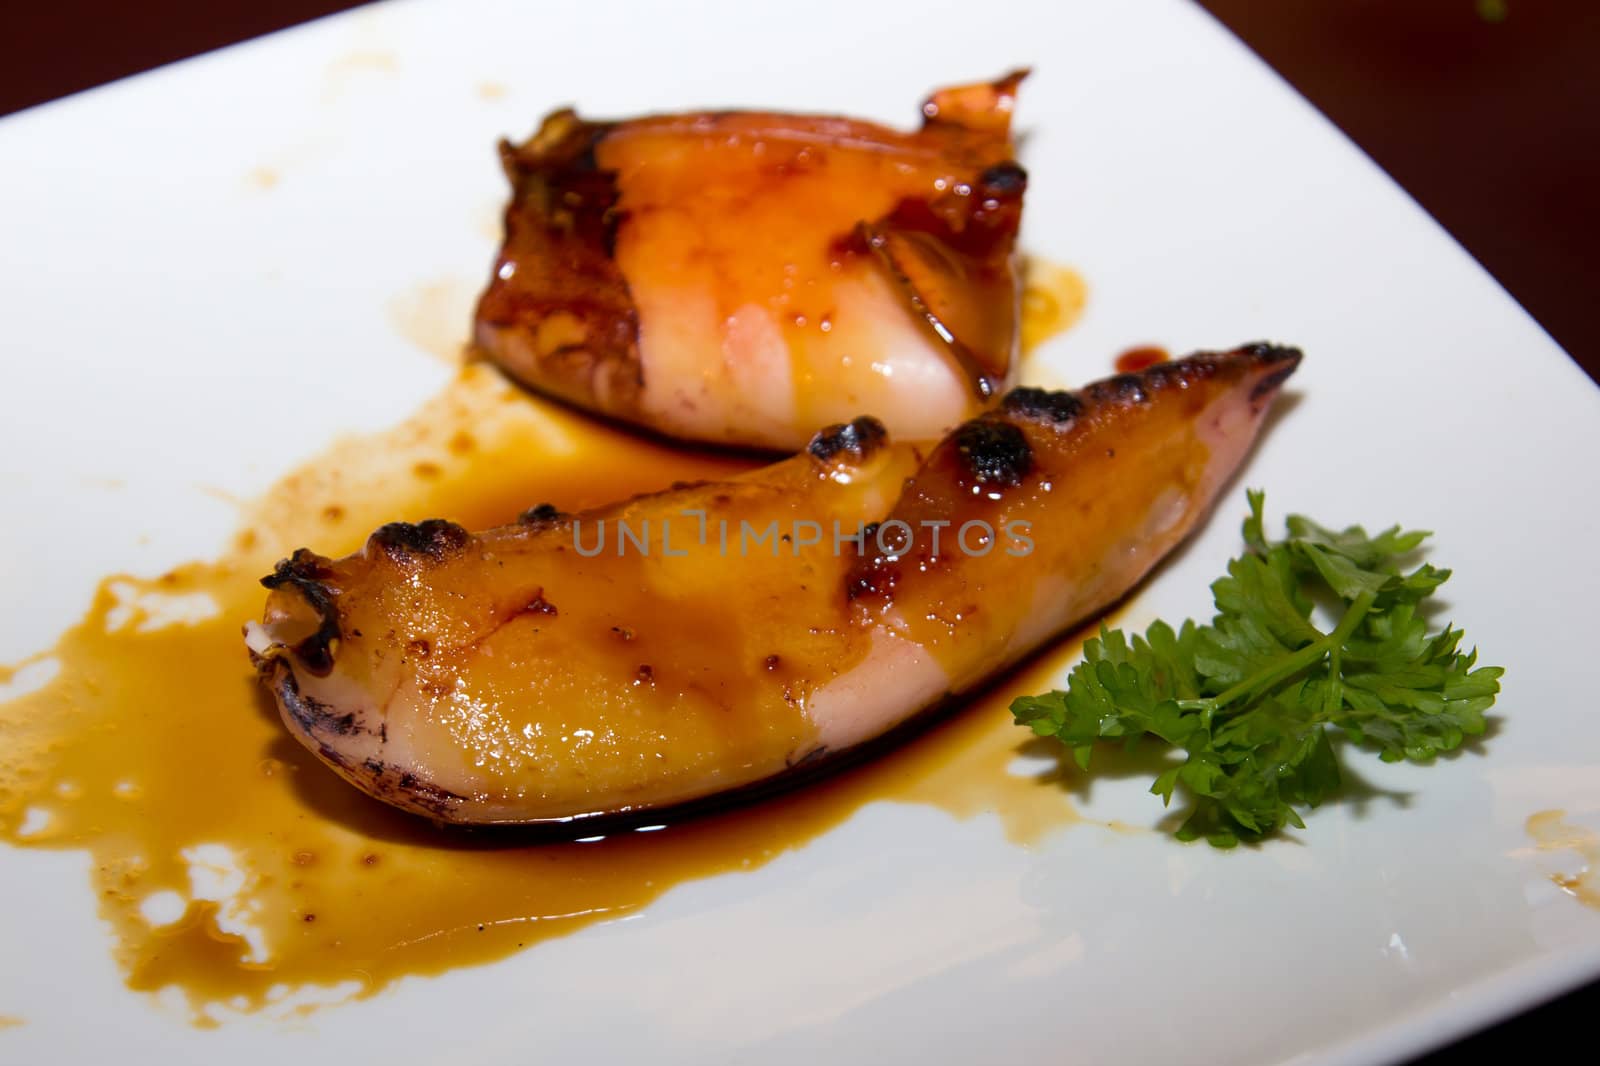 Grilled Japanese squid with black sauce on a white plate